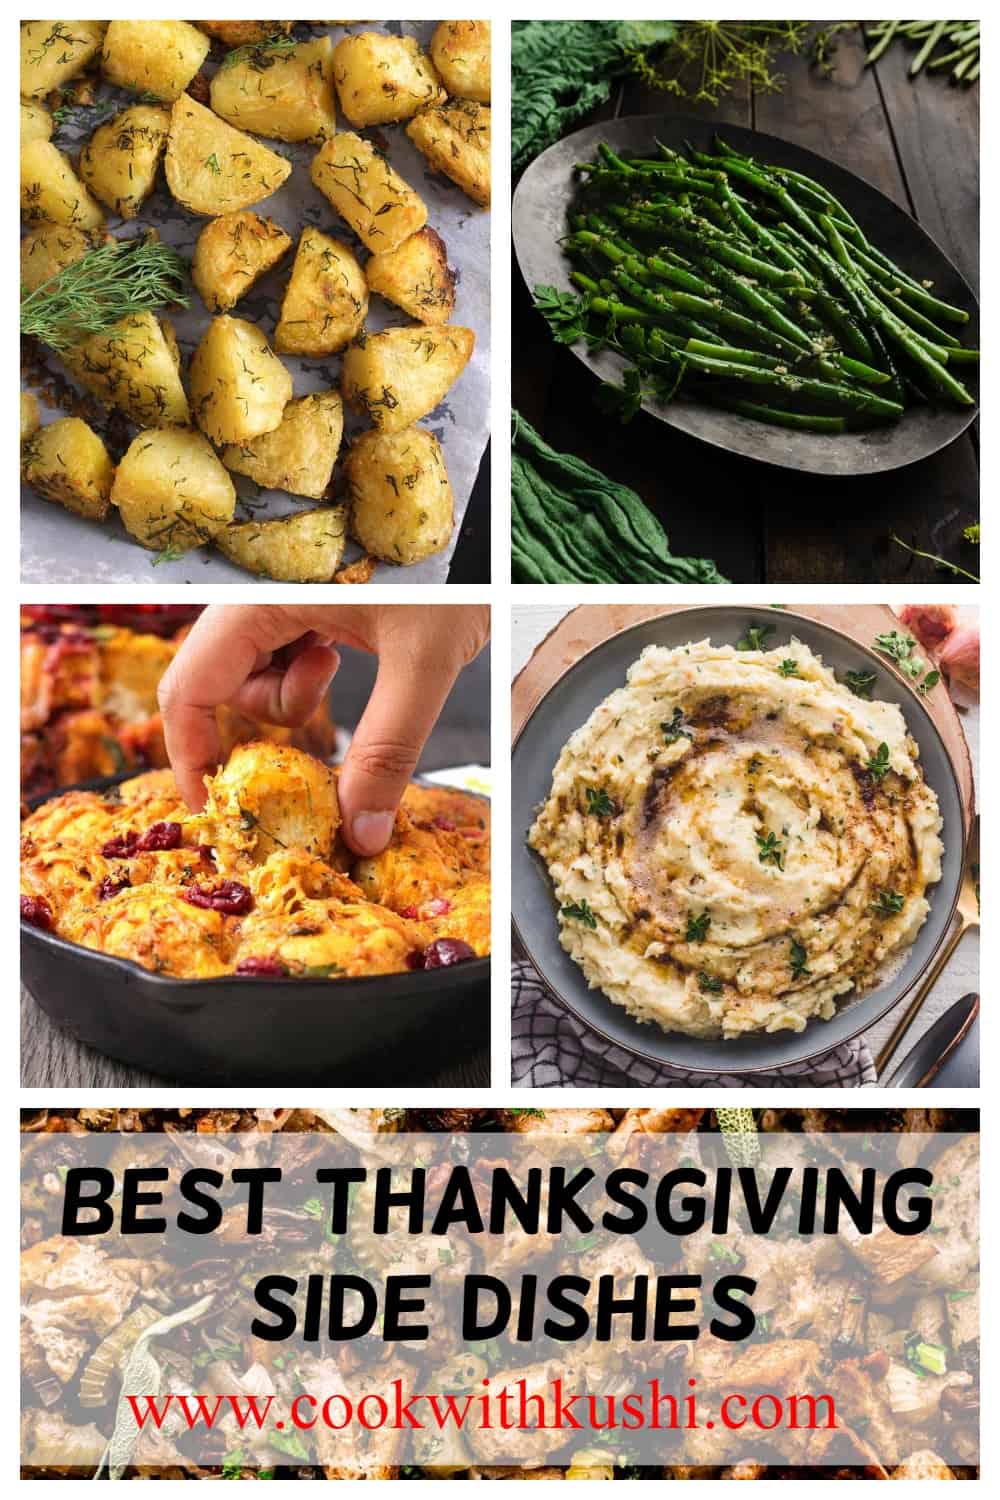 Best Thanksgiving side dishes with potatoes, brussels sprouts, mushroom, cranberries, squash, carrots, green beans, sweet potatoes, stuffing, corn, cauliflower